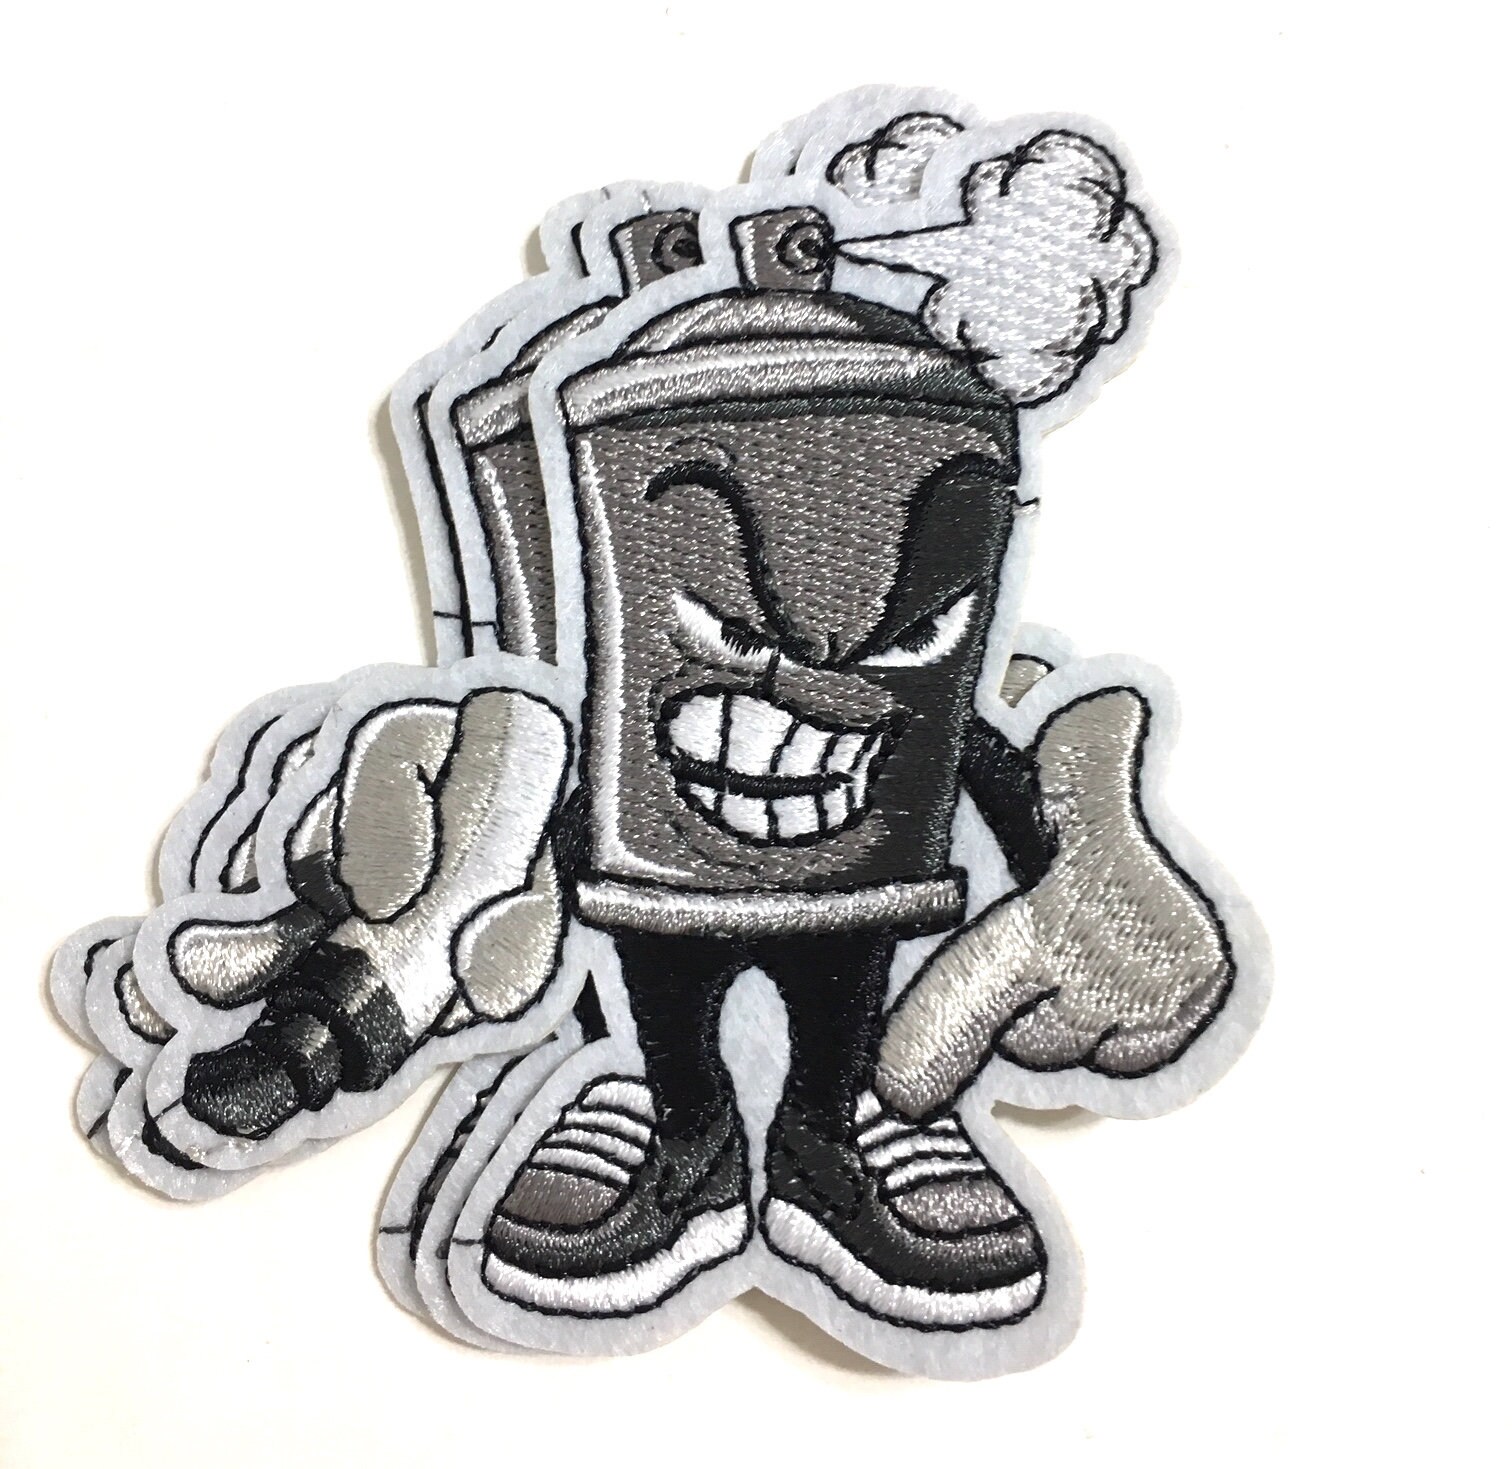 Cool Iron on Patches Graffiti Art Inspired Collection of Clothing Patches  Limited Edition (Shame 125th Fatcap)